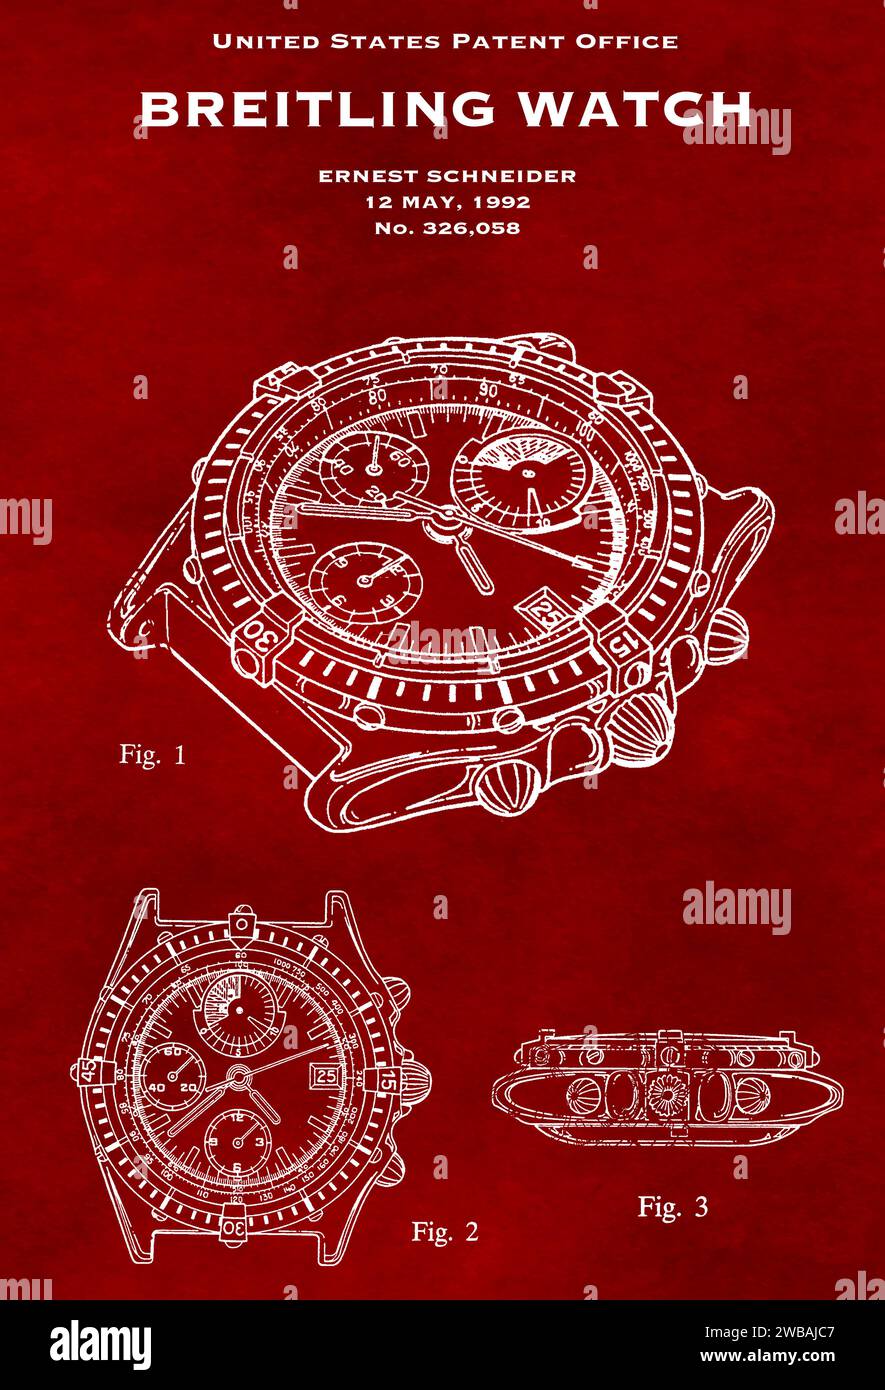 US patent office design from 1992 of a Breitling watch on a red background Stock Photo